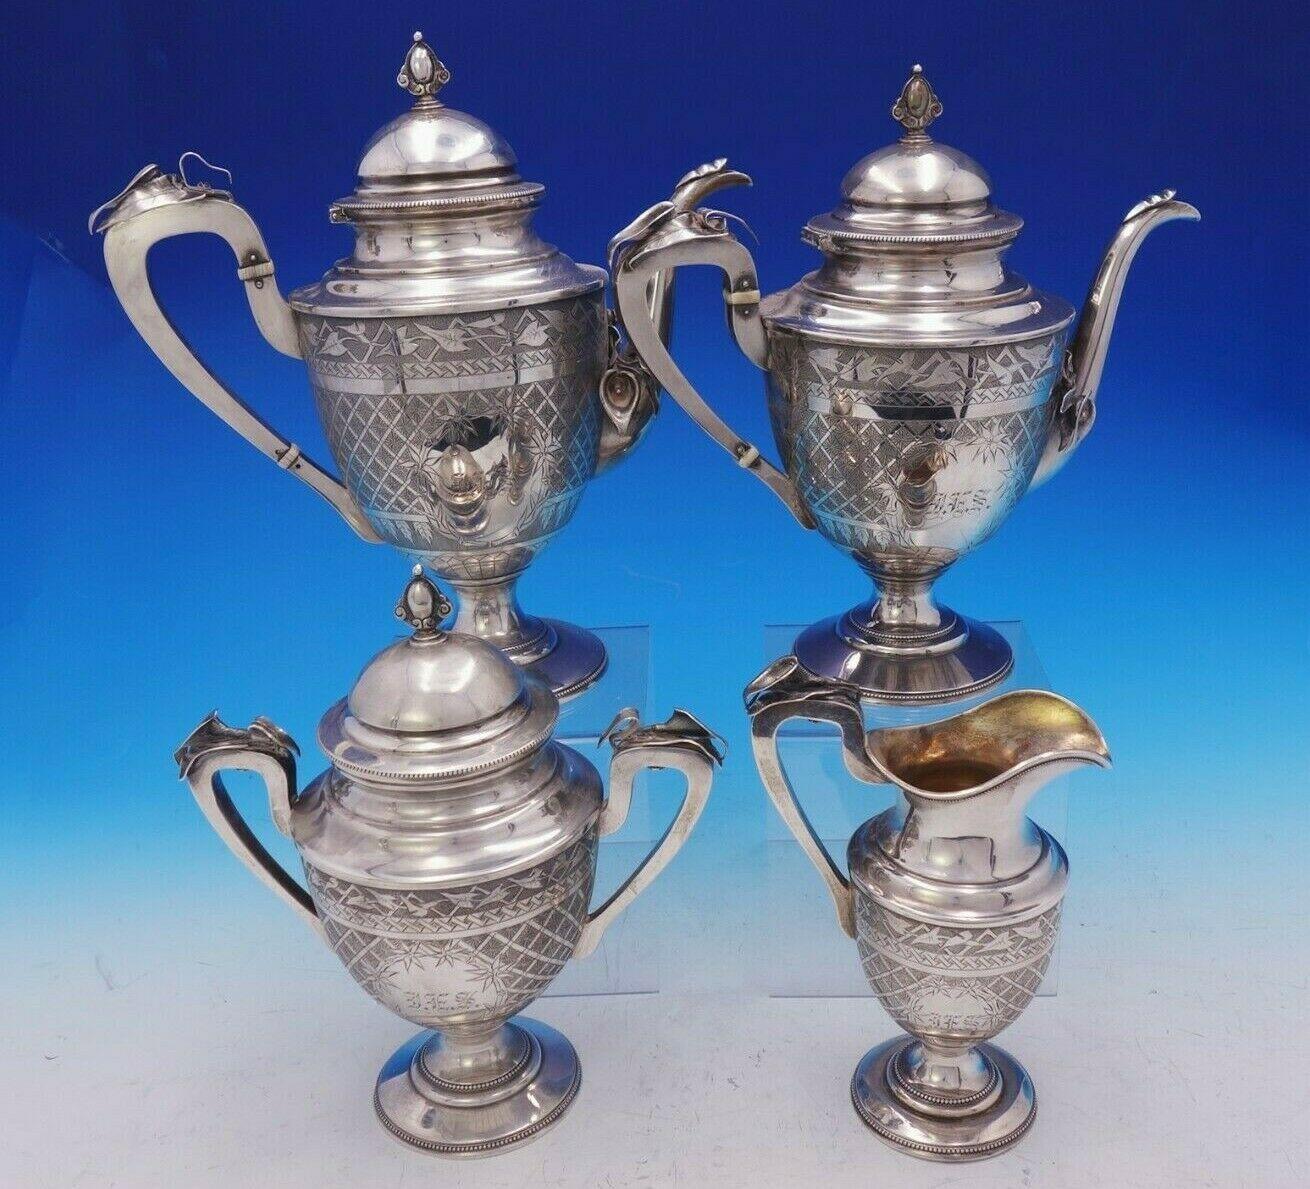 Calla Lily by Ford and Tupper

Beautiful Ford and Tupper sterling silver 4-piece tea set with applied 3-D calla lilies circa 1867-1874. This set features hand engraved bamboo lattice and stippled design with border of engraved calla lilies and